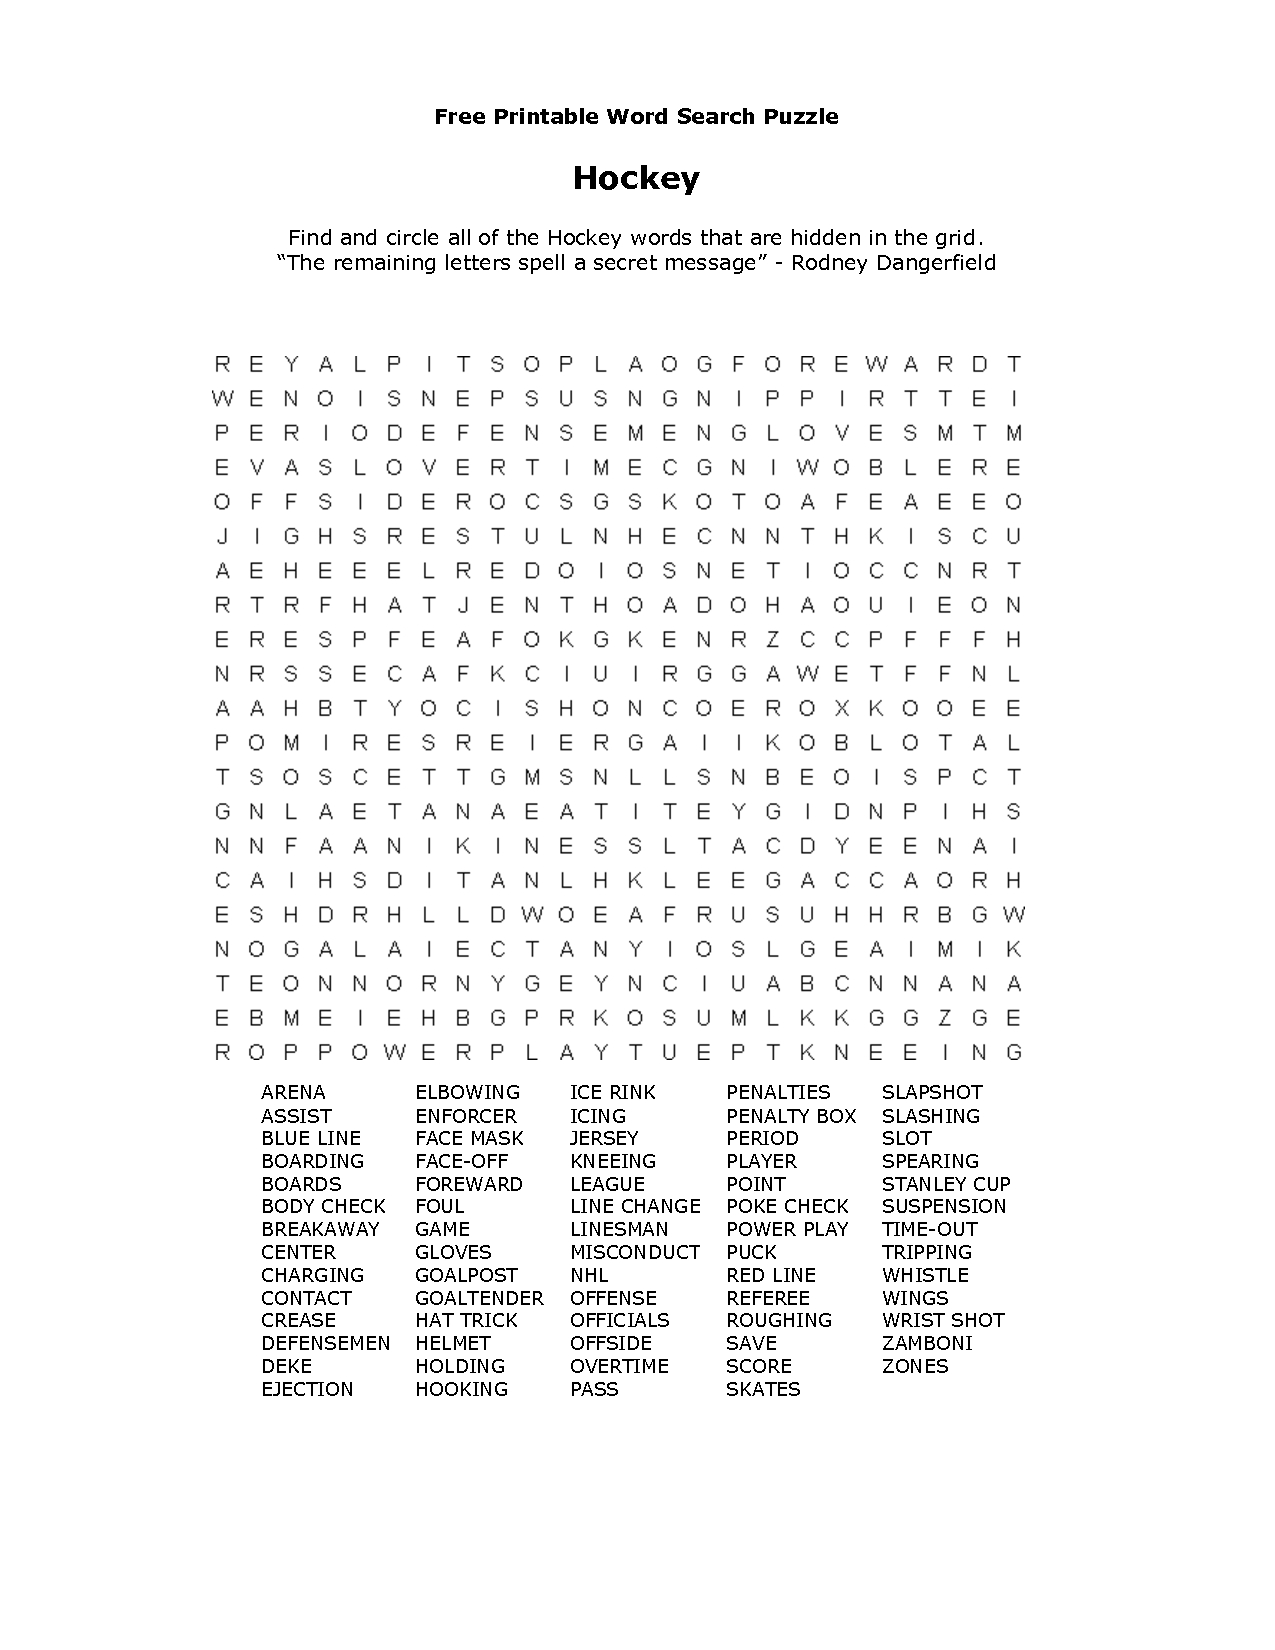 Free Printable Word Searches | Kiddo Shelter | Games | Free - Free Printable Word Search Puzzles For Adults